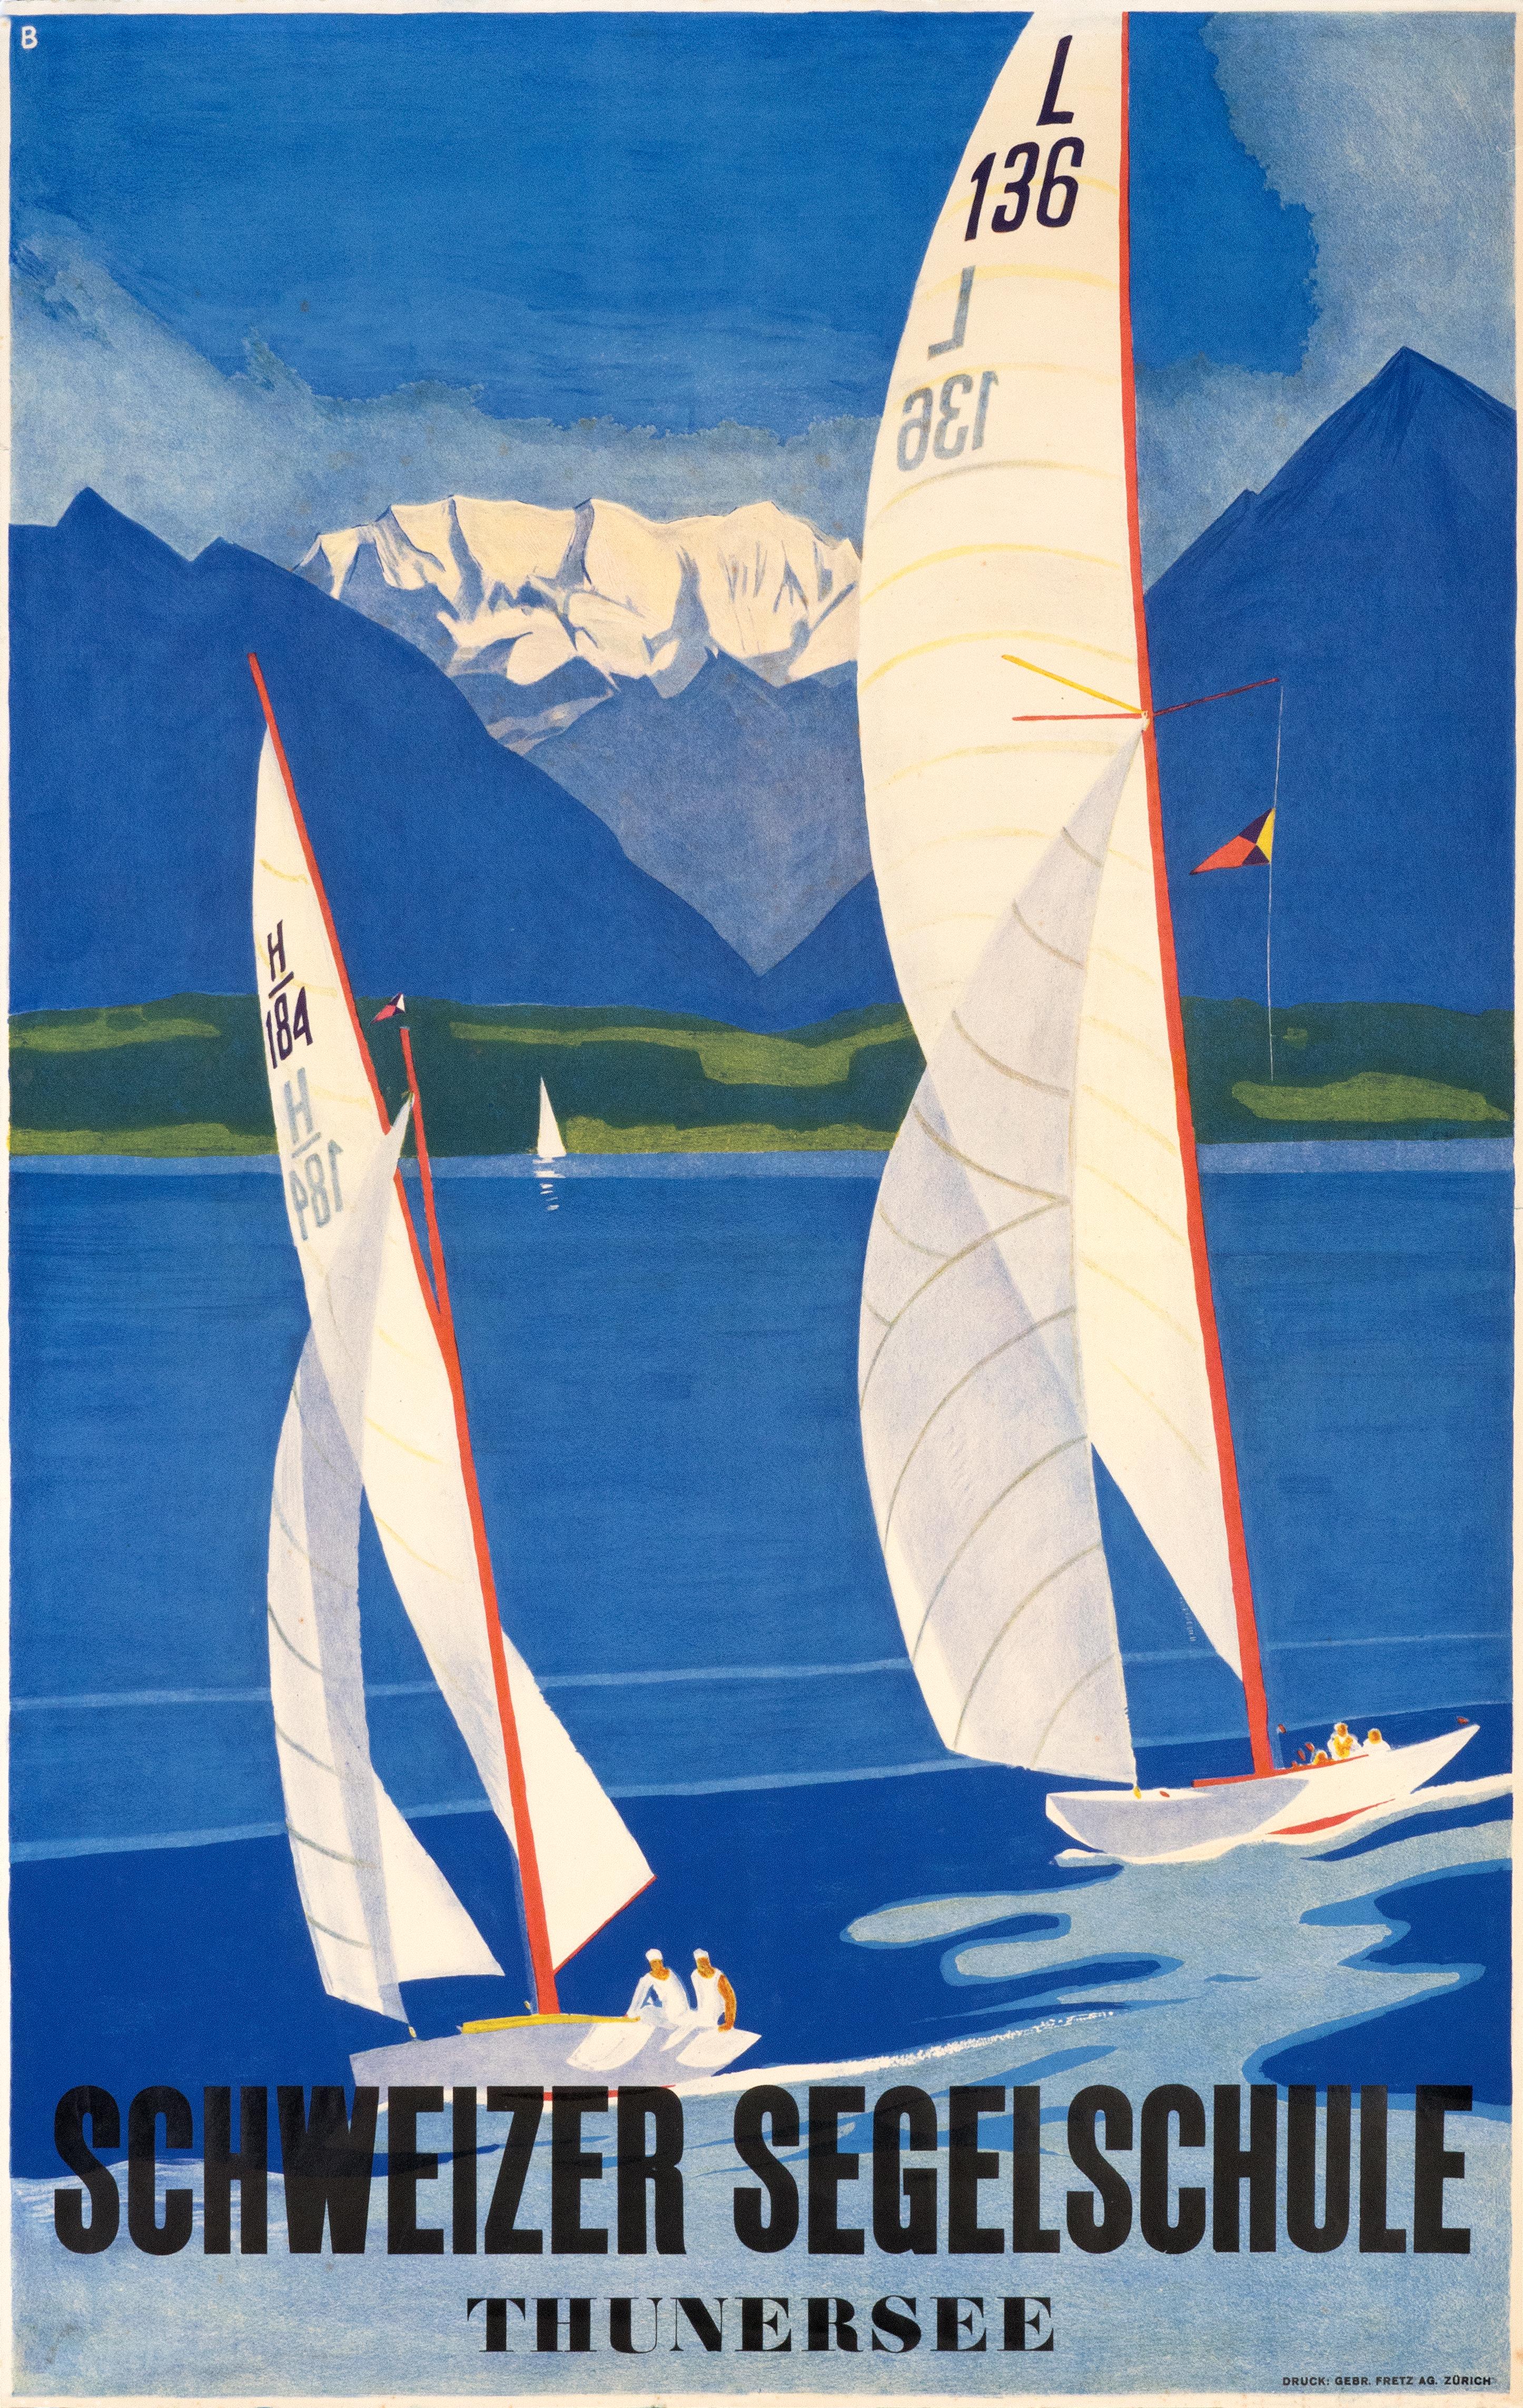 "Schweizer Segelschule Thunersee" Original Vintage Boating Poster - Print by Otto Baumberger